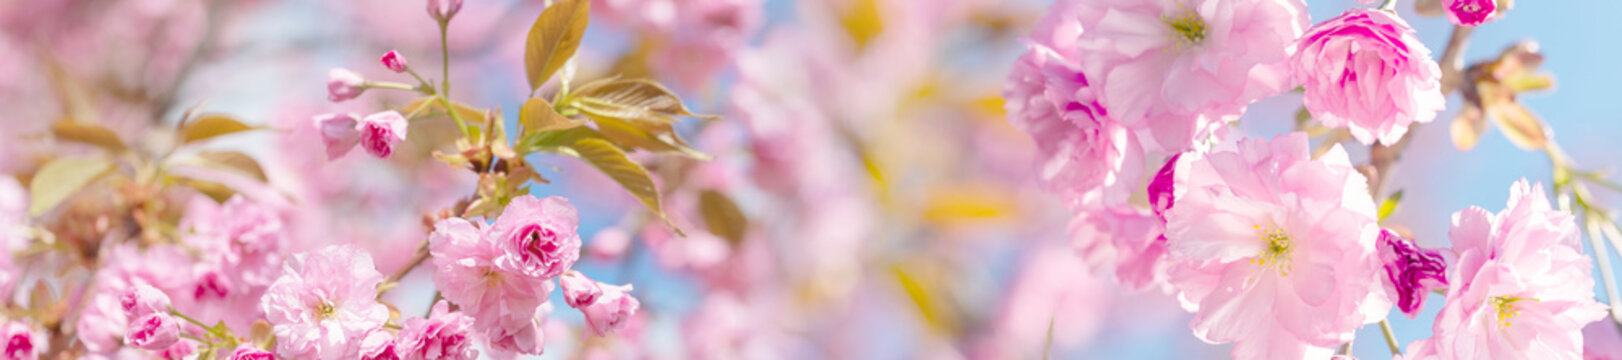 springtime panorama  background  with pink blossom